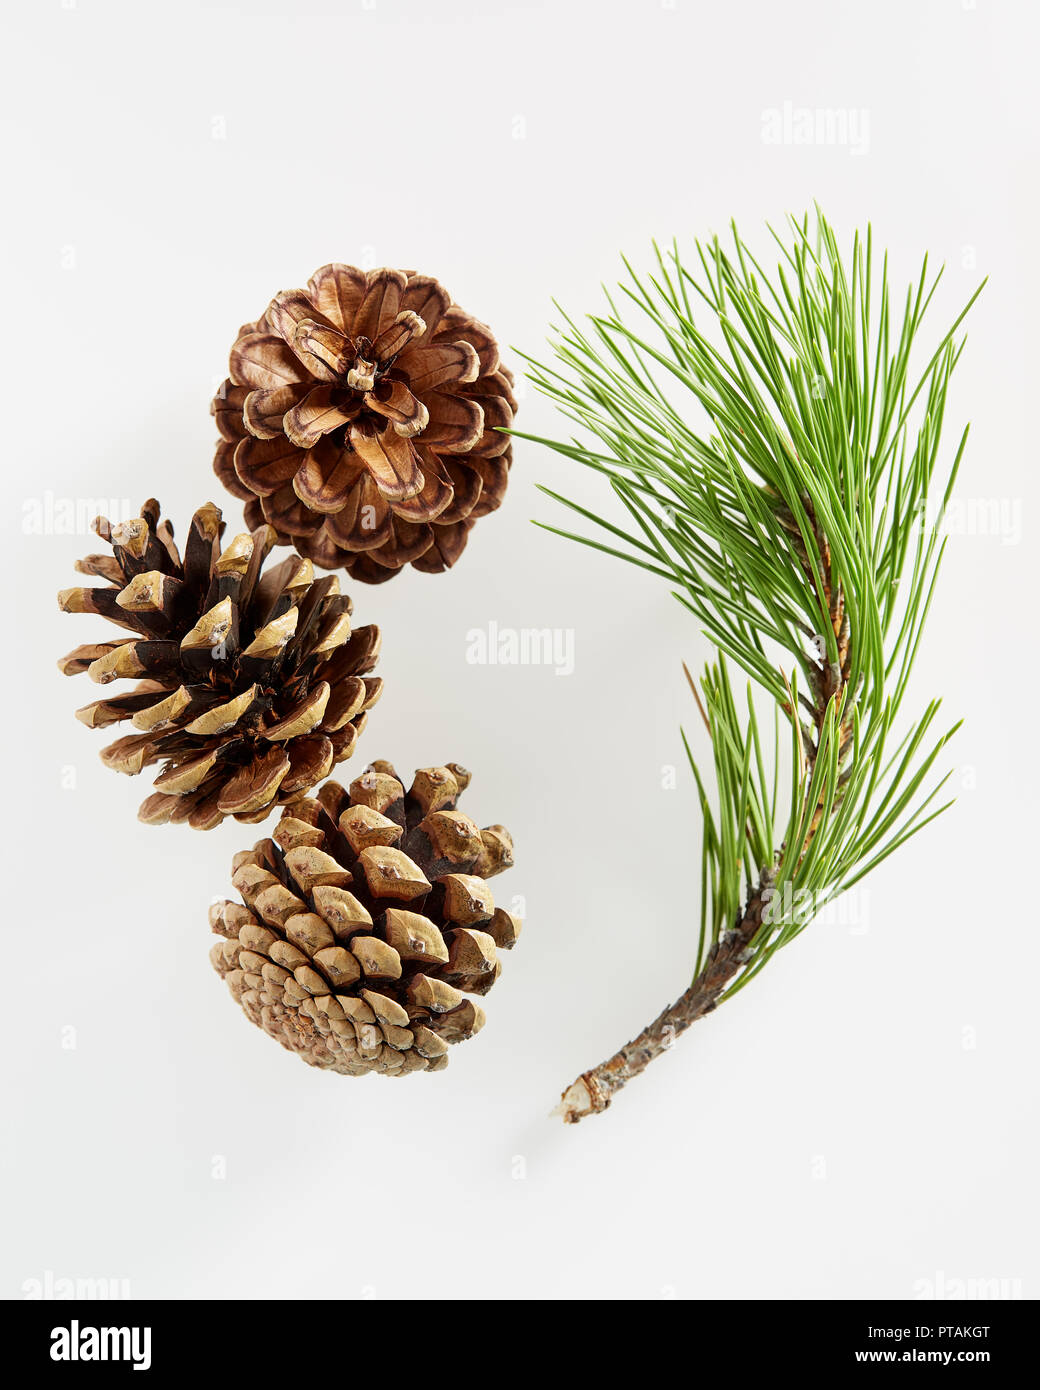 Pine branch with pine cones on white background. Stock Photo